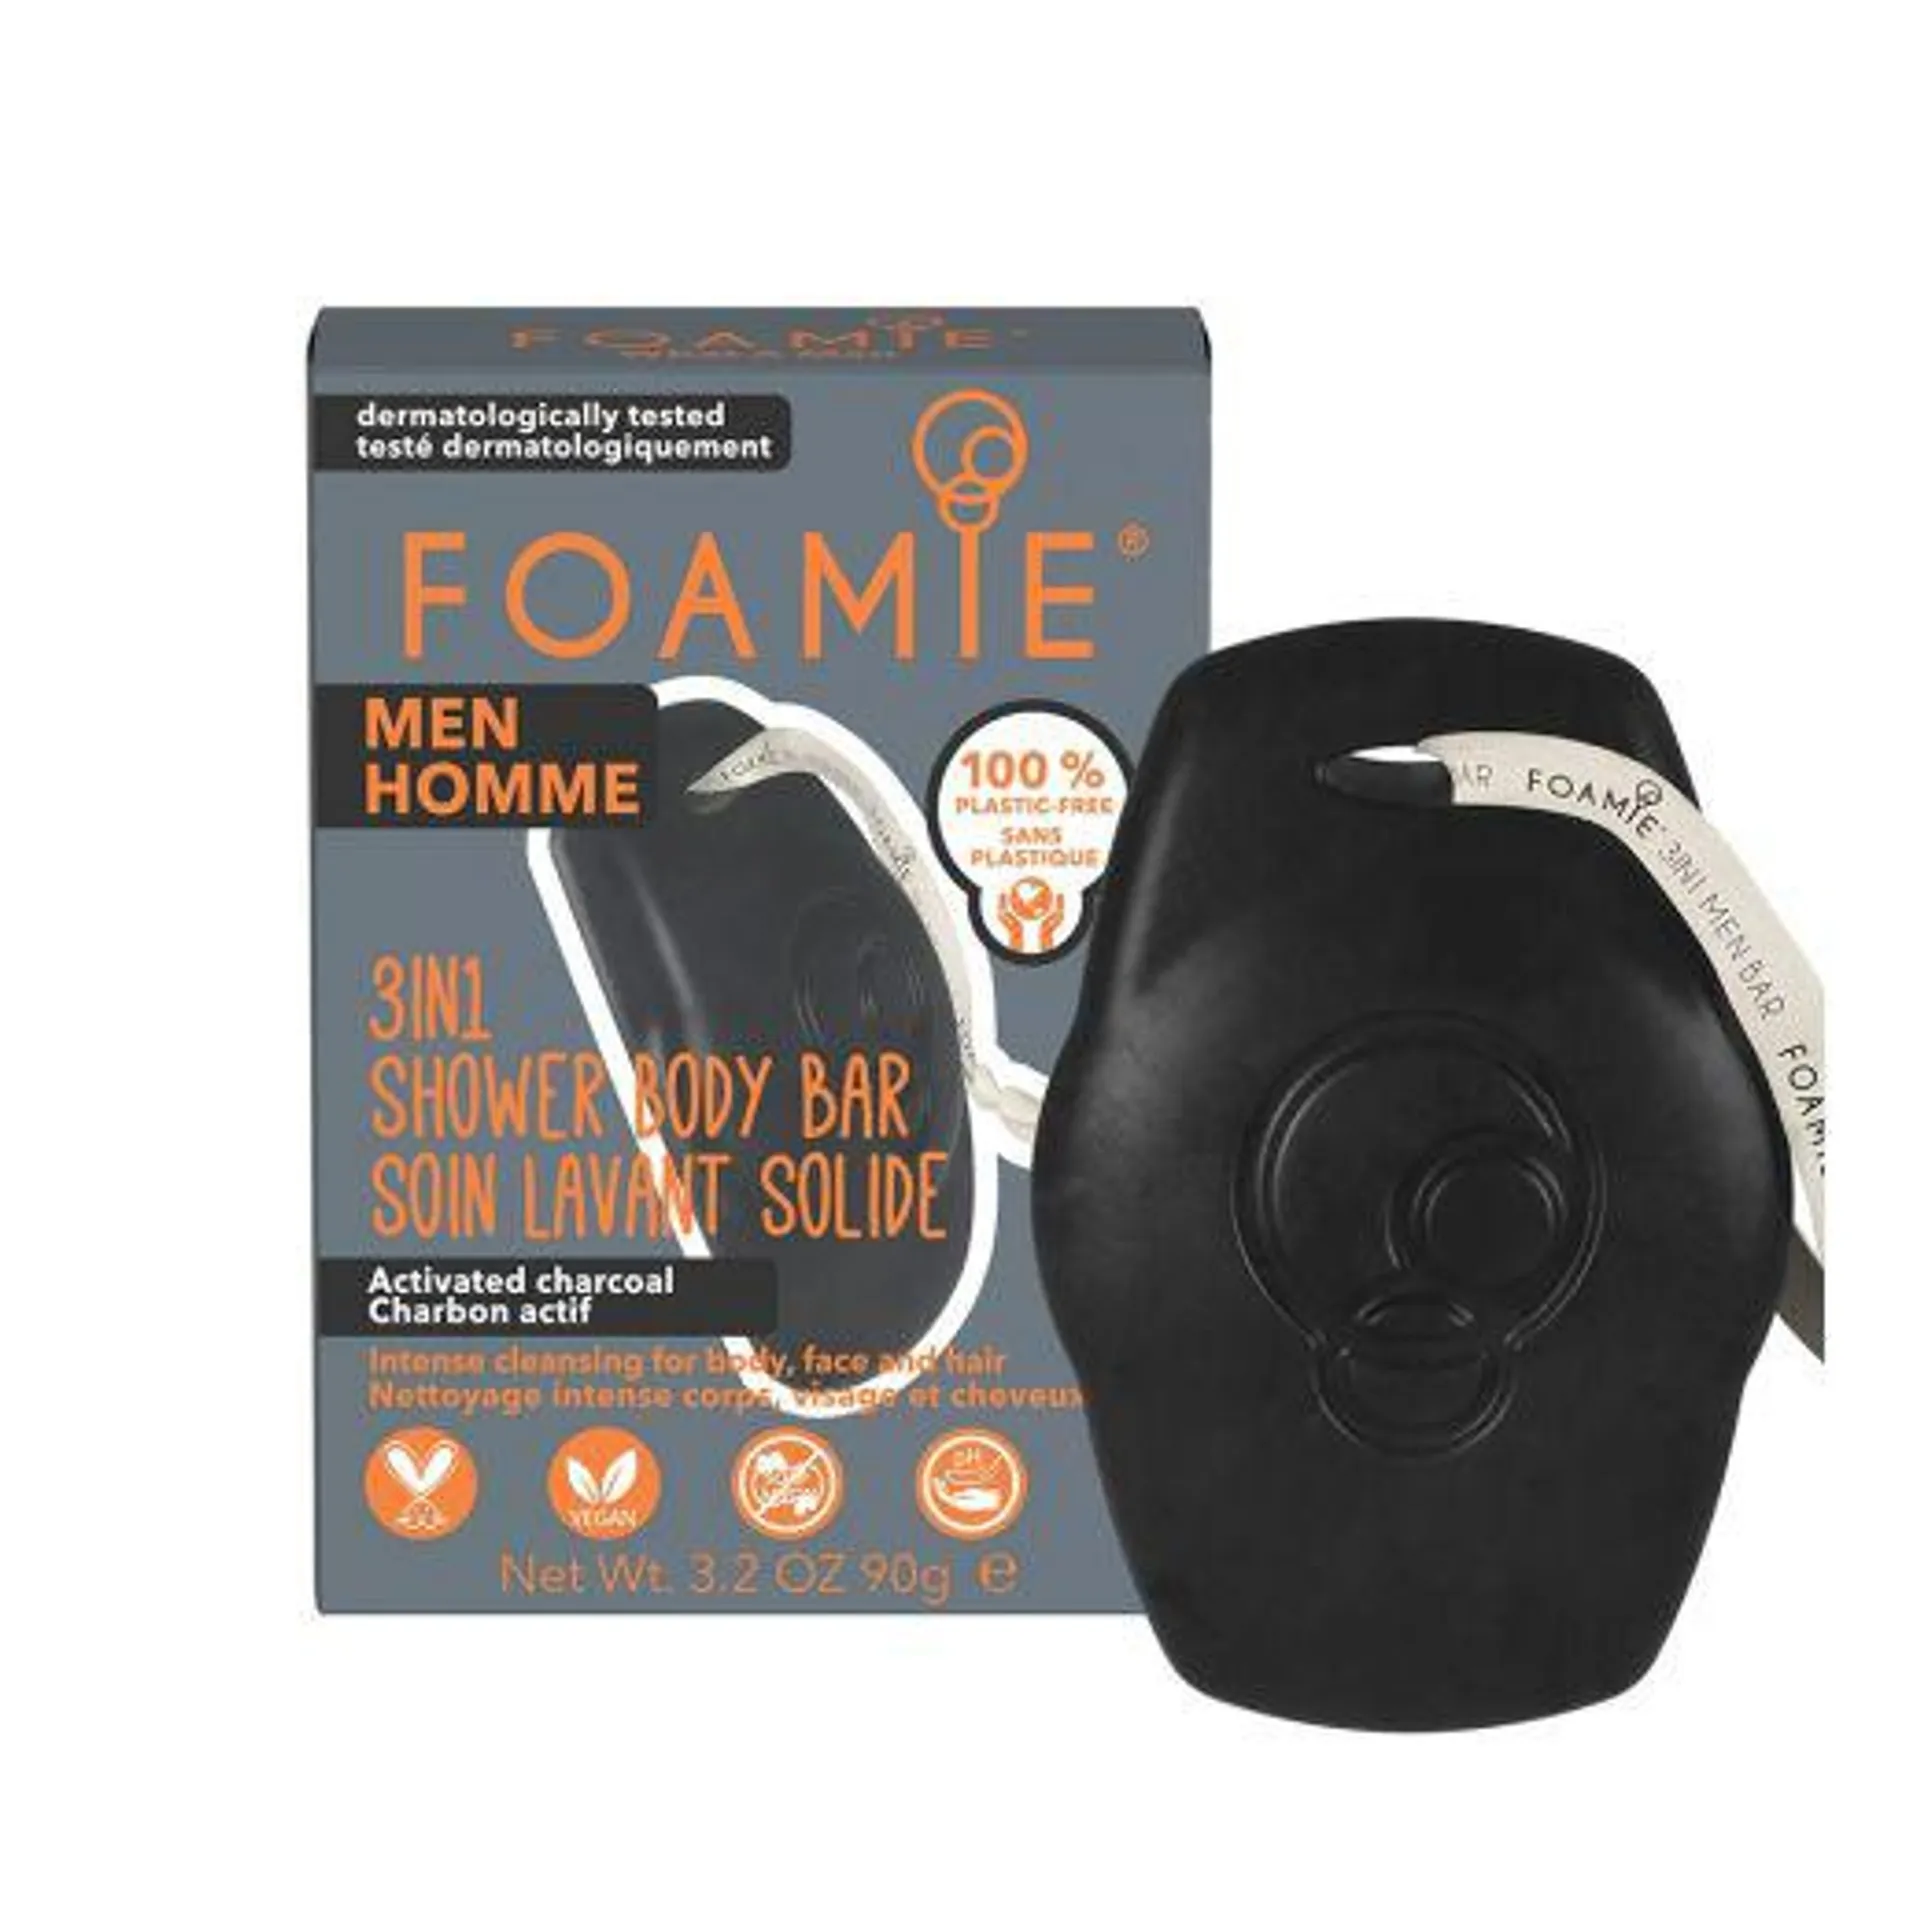 FOAMIE 3 in 1 Shower Body Bar - Charcoal, Rosewood and Tonka bean